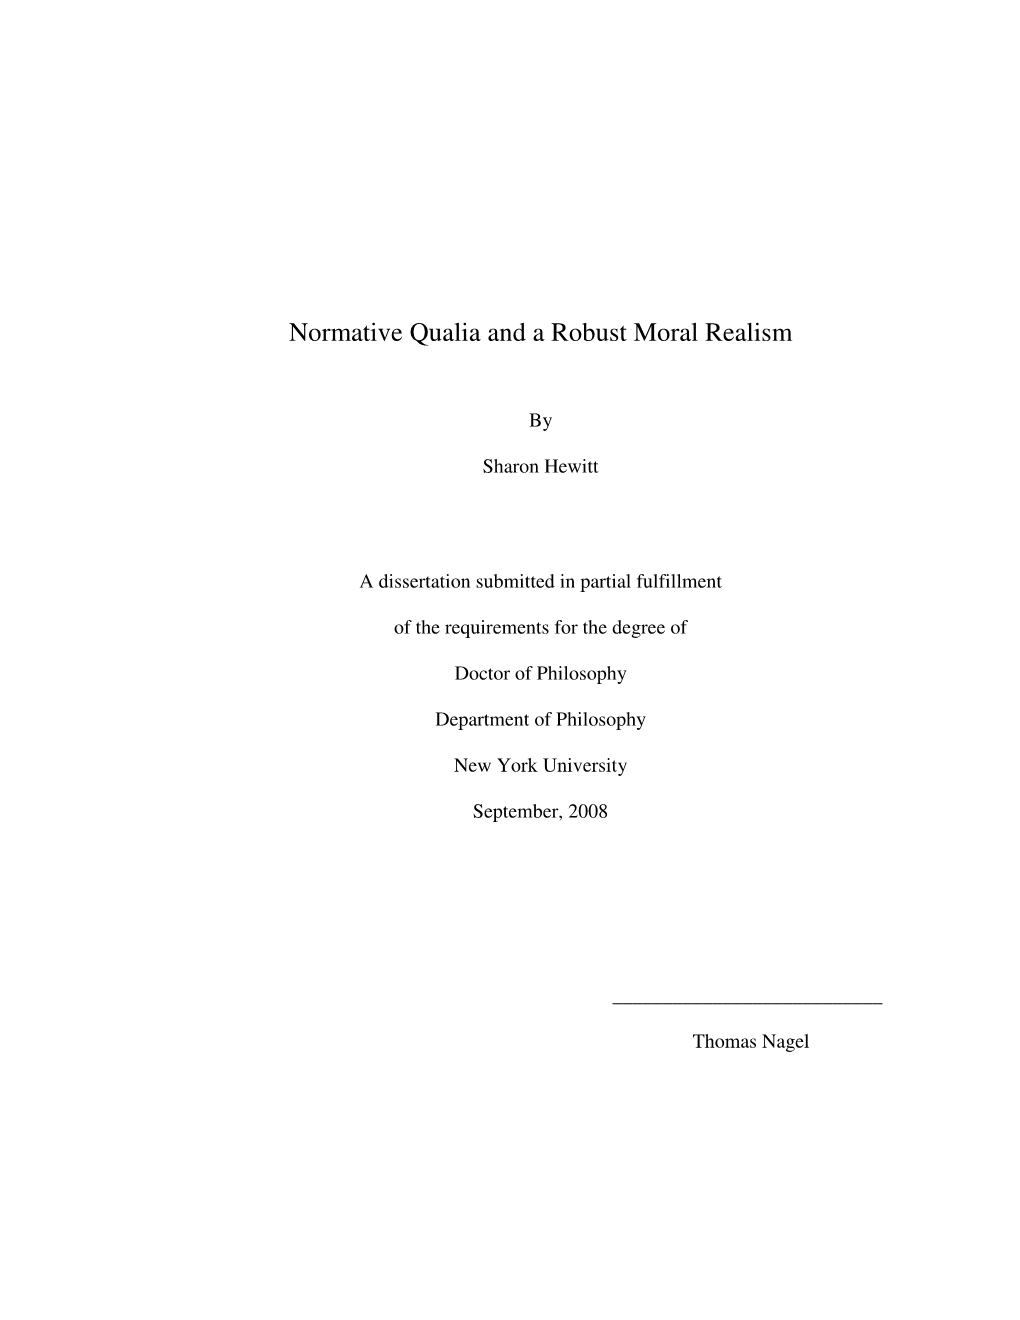 Normative Qualia and a Robust Moral Realism